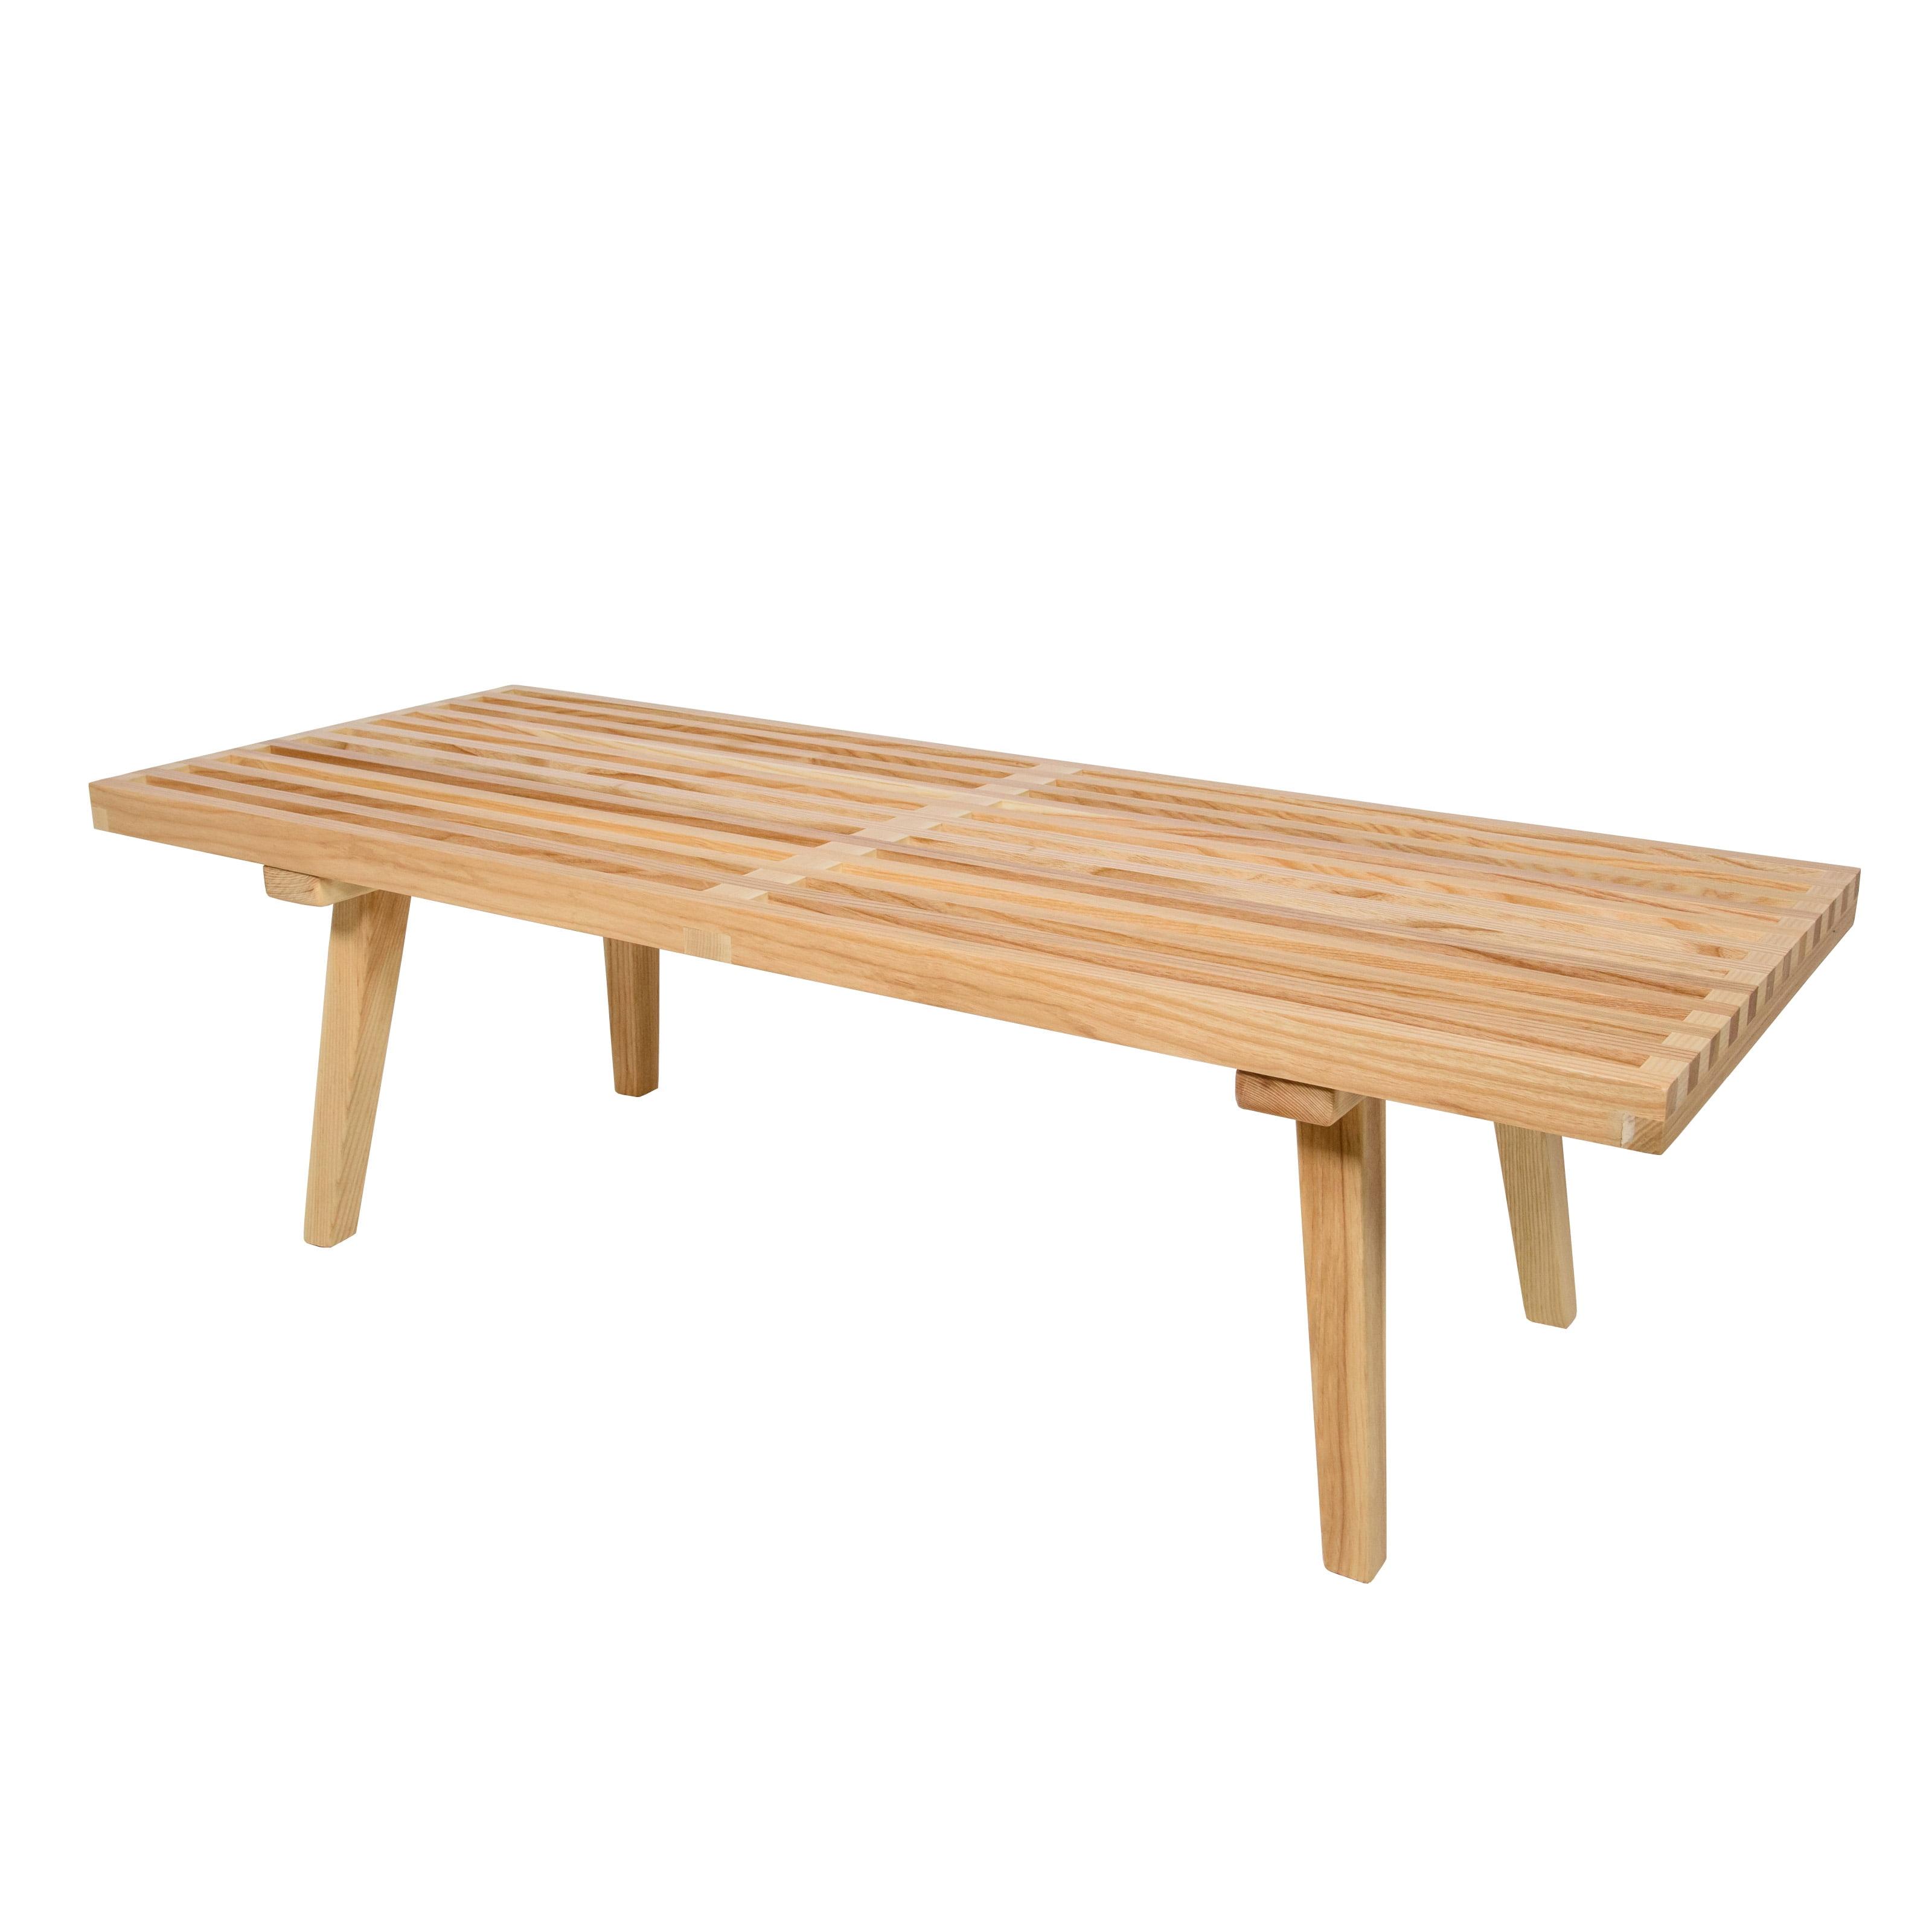 Mid-Century Natural Wood Platform Bench - 48 Inches